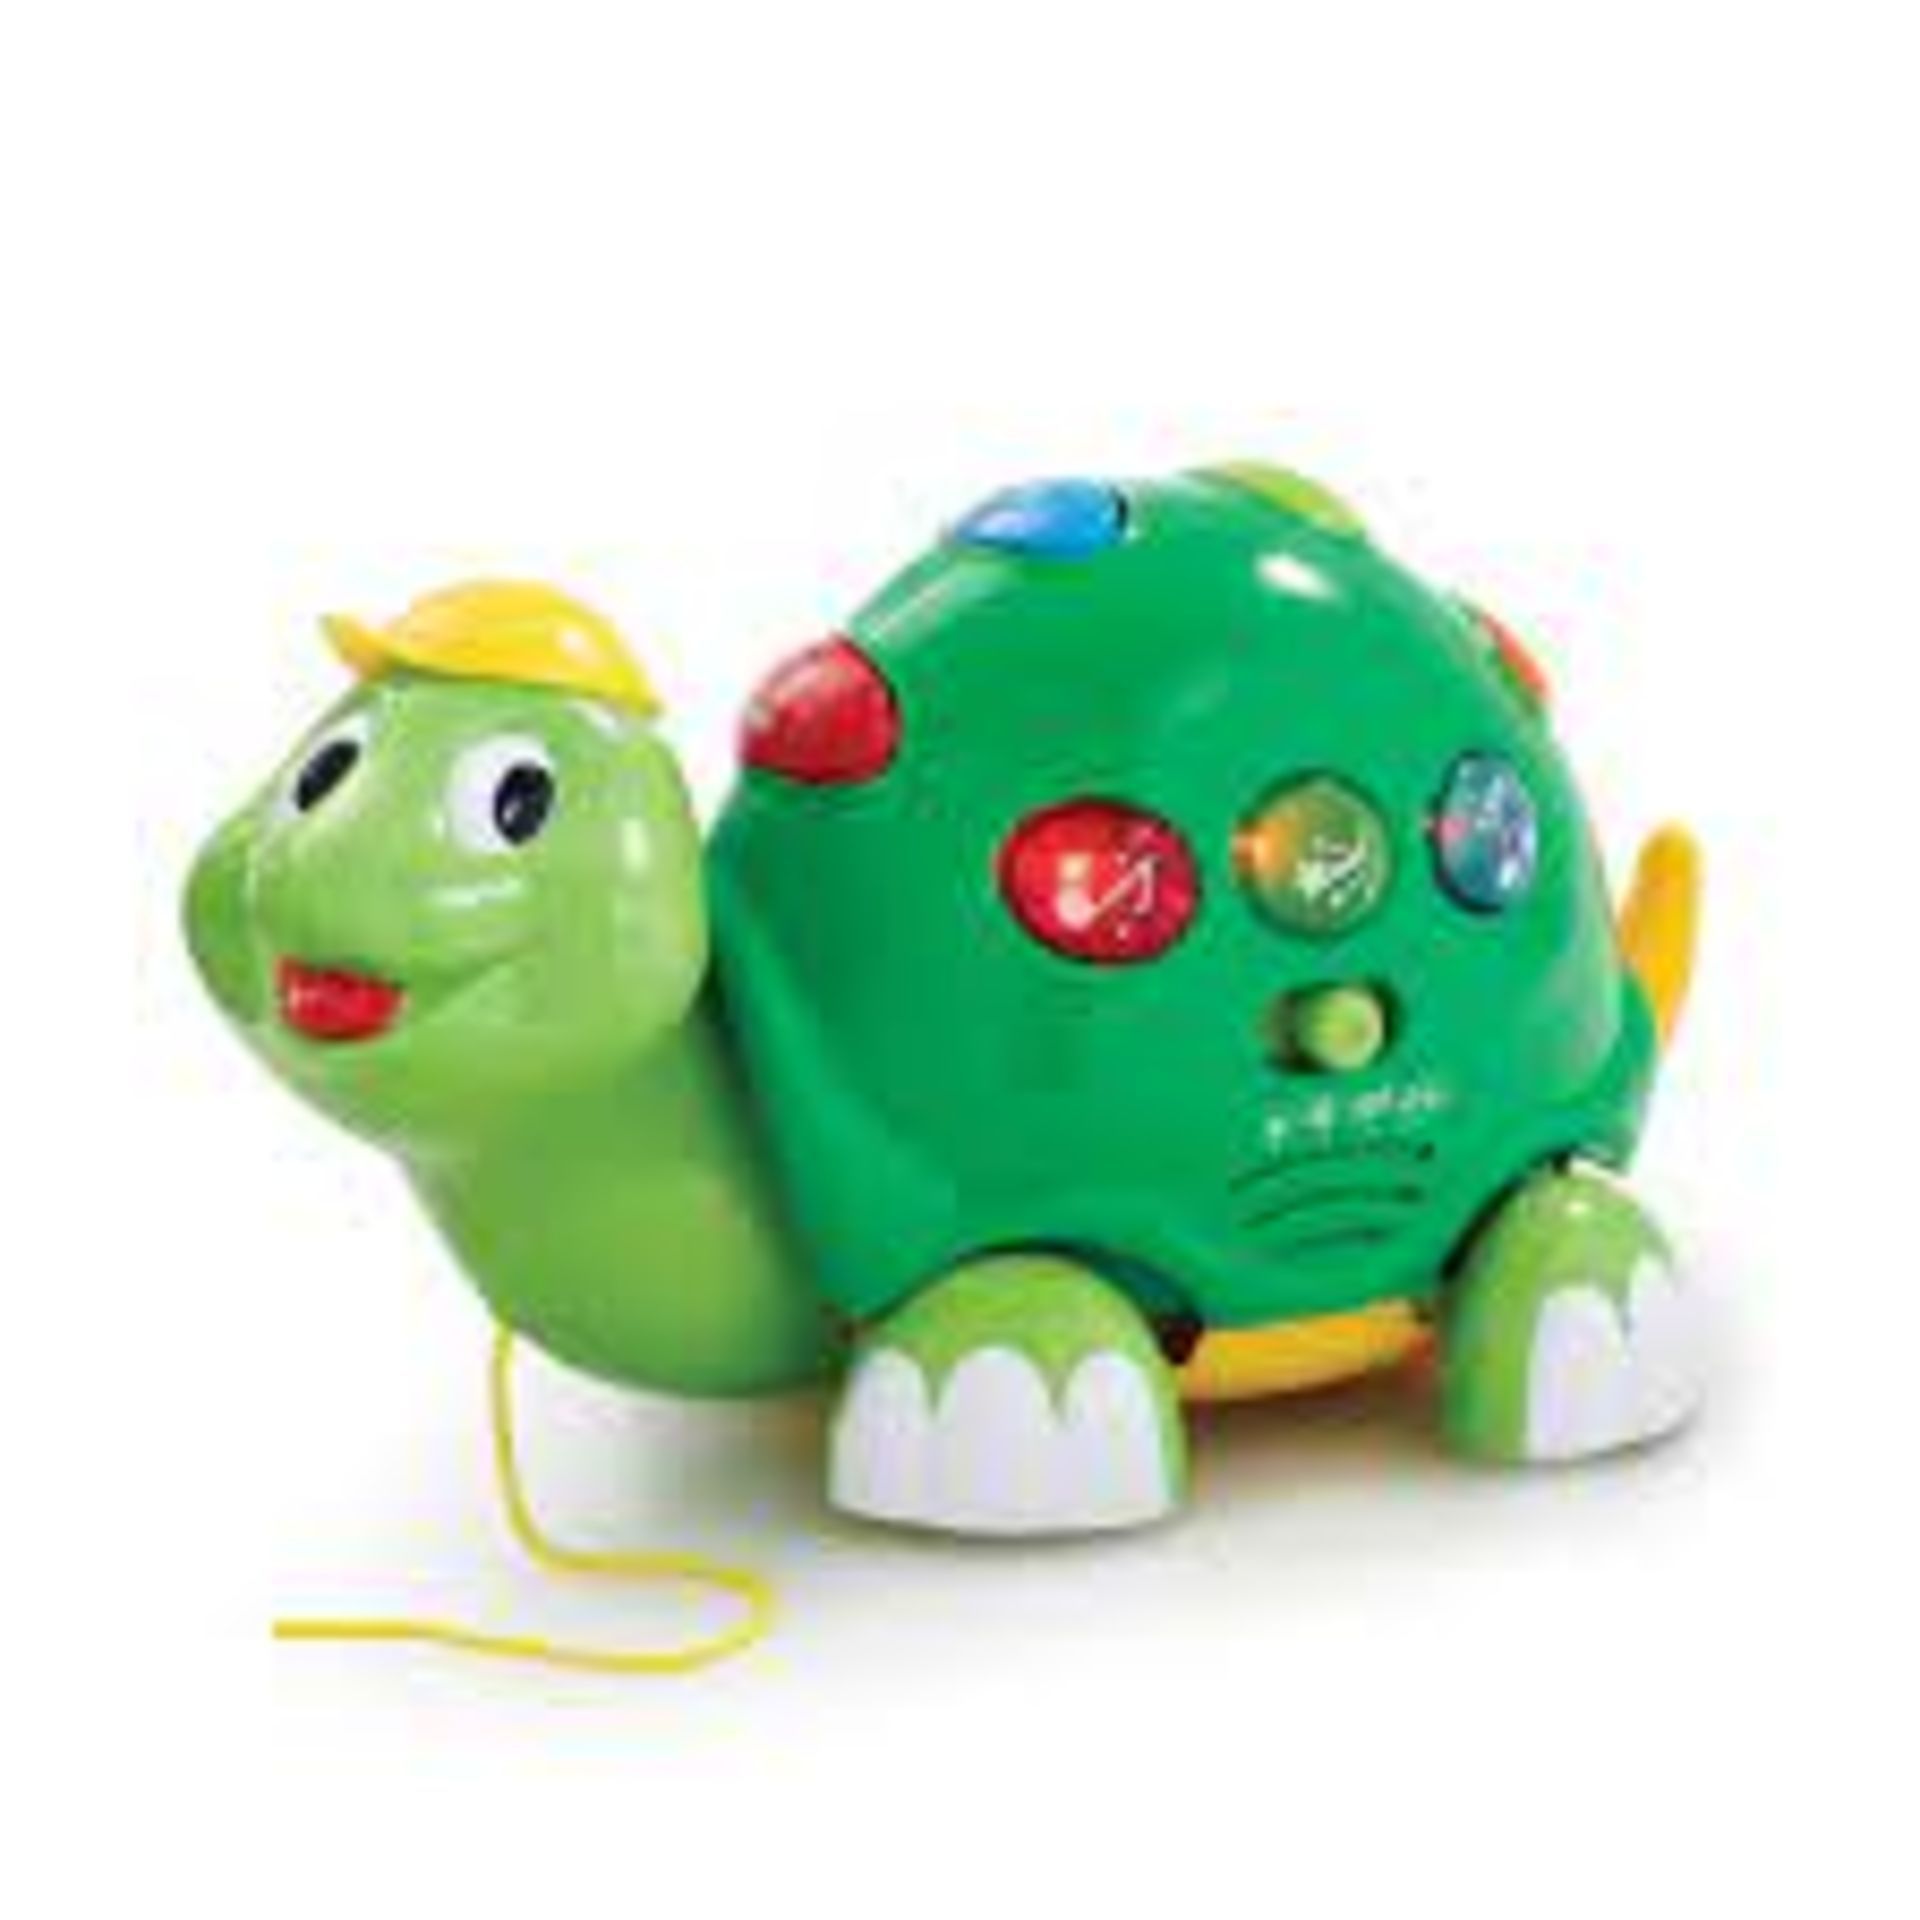 8 X BOXED ADDO LITTLE LOT PULL ALONG MUSICAL TORTOISE. LIGHTS & SOUNDS. (ROW9) - Image 2 of 2